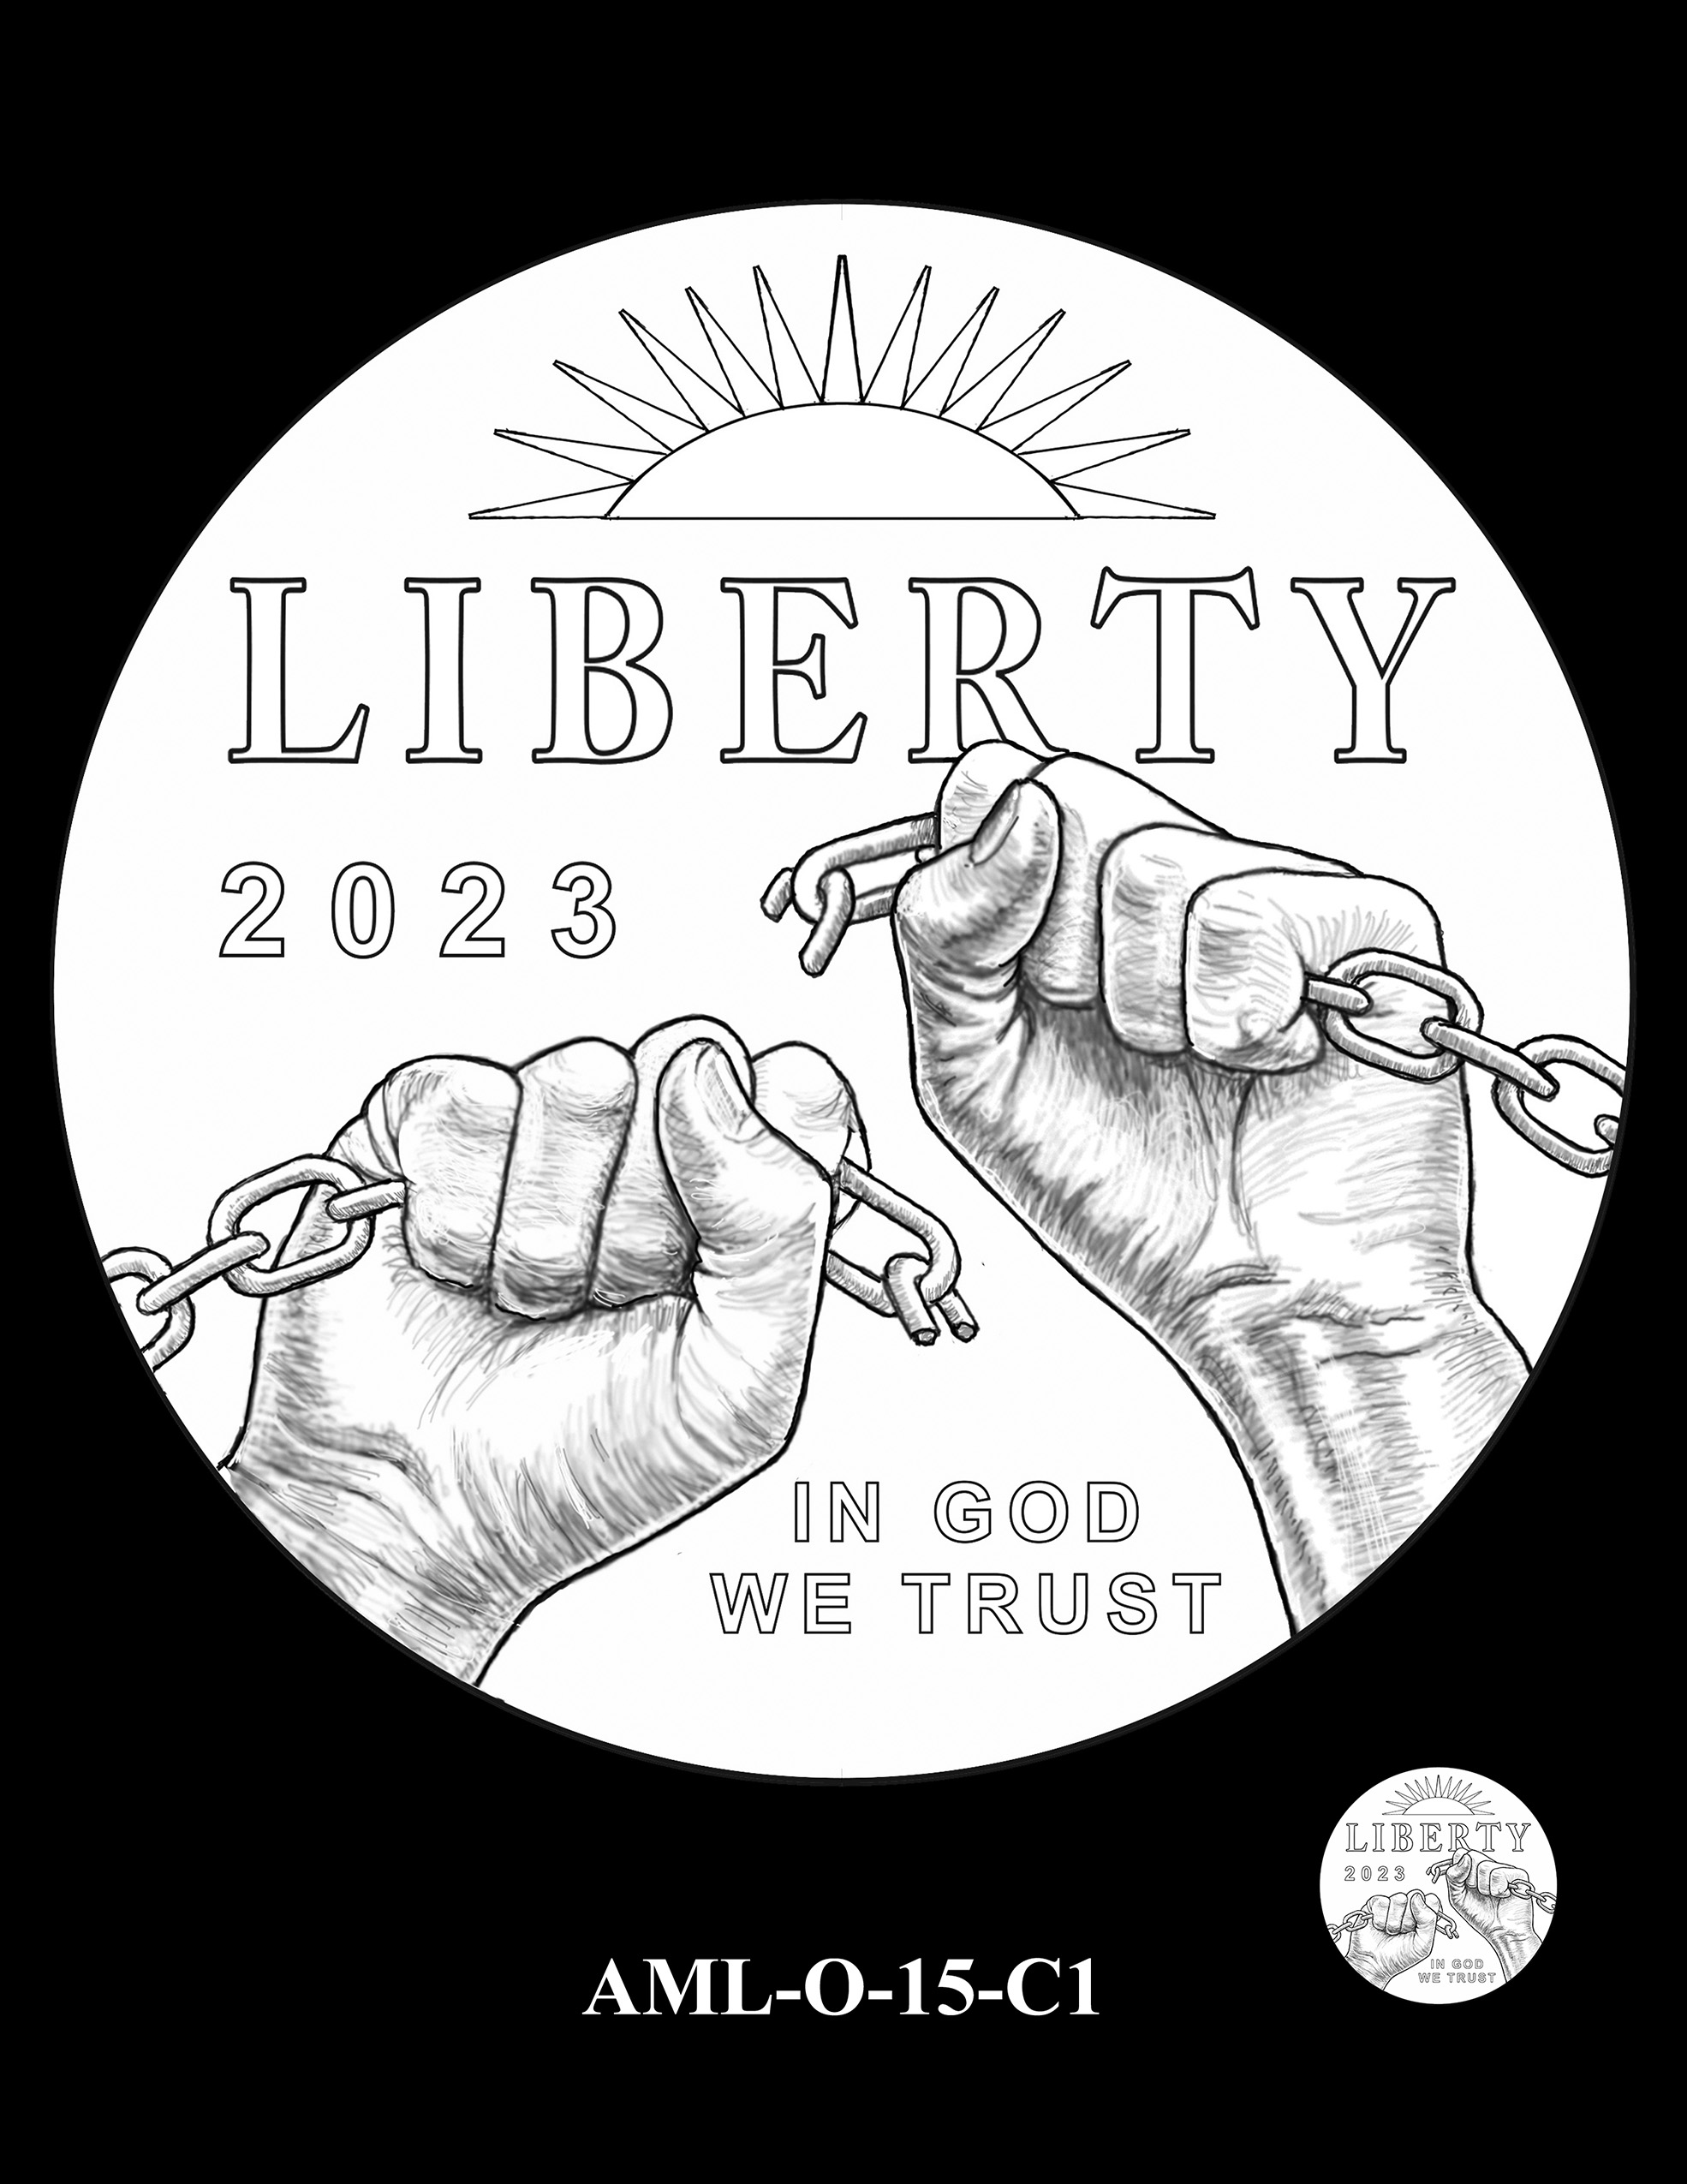 AML-O-15-C1 -- 2023 American Liberty High Relief 24k Gold and Silver Medal Program